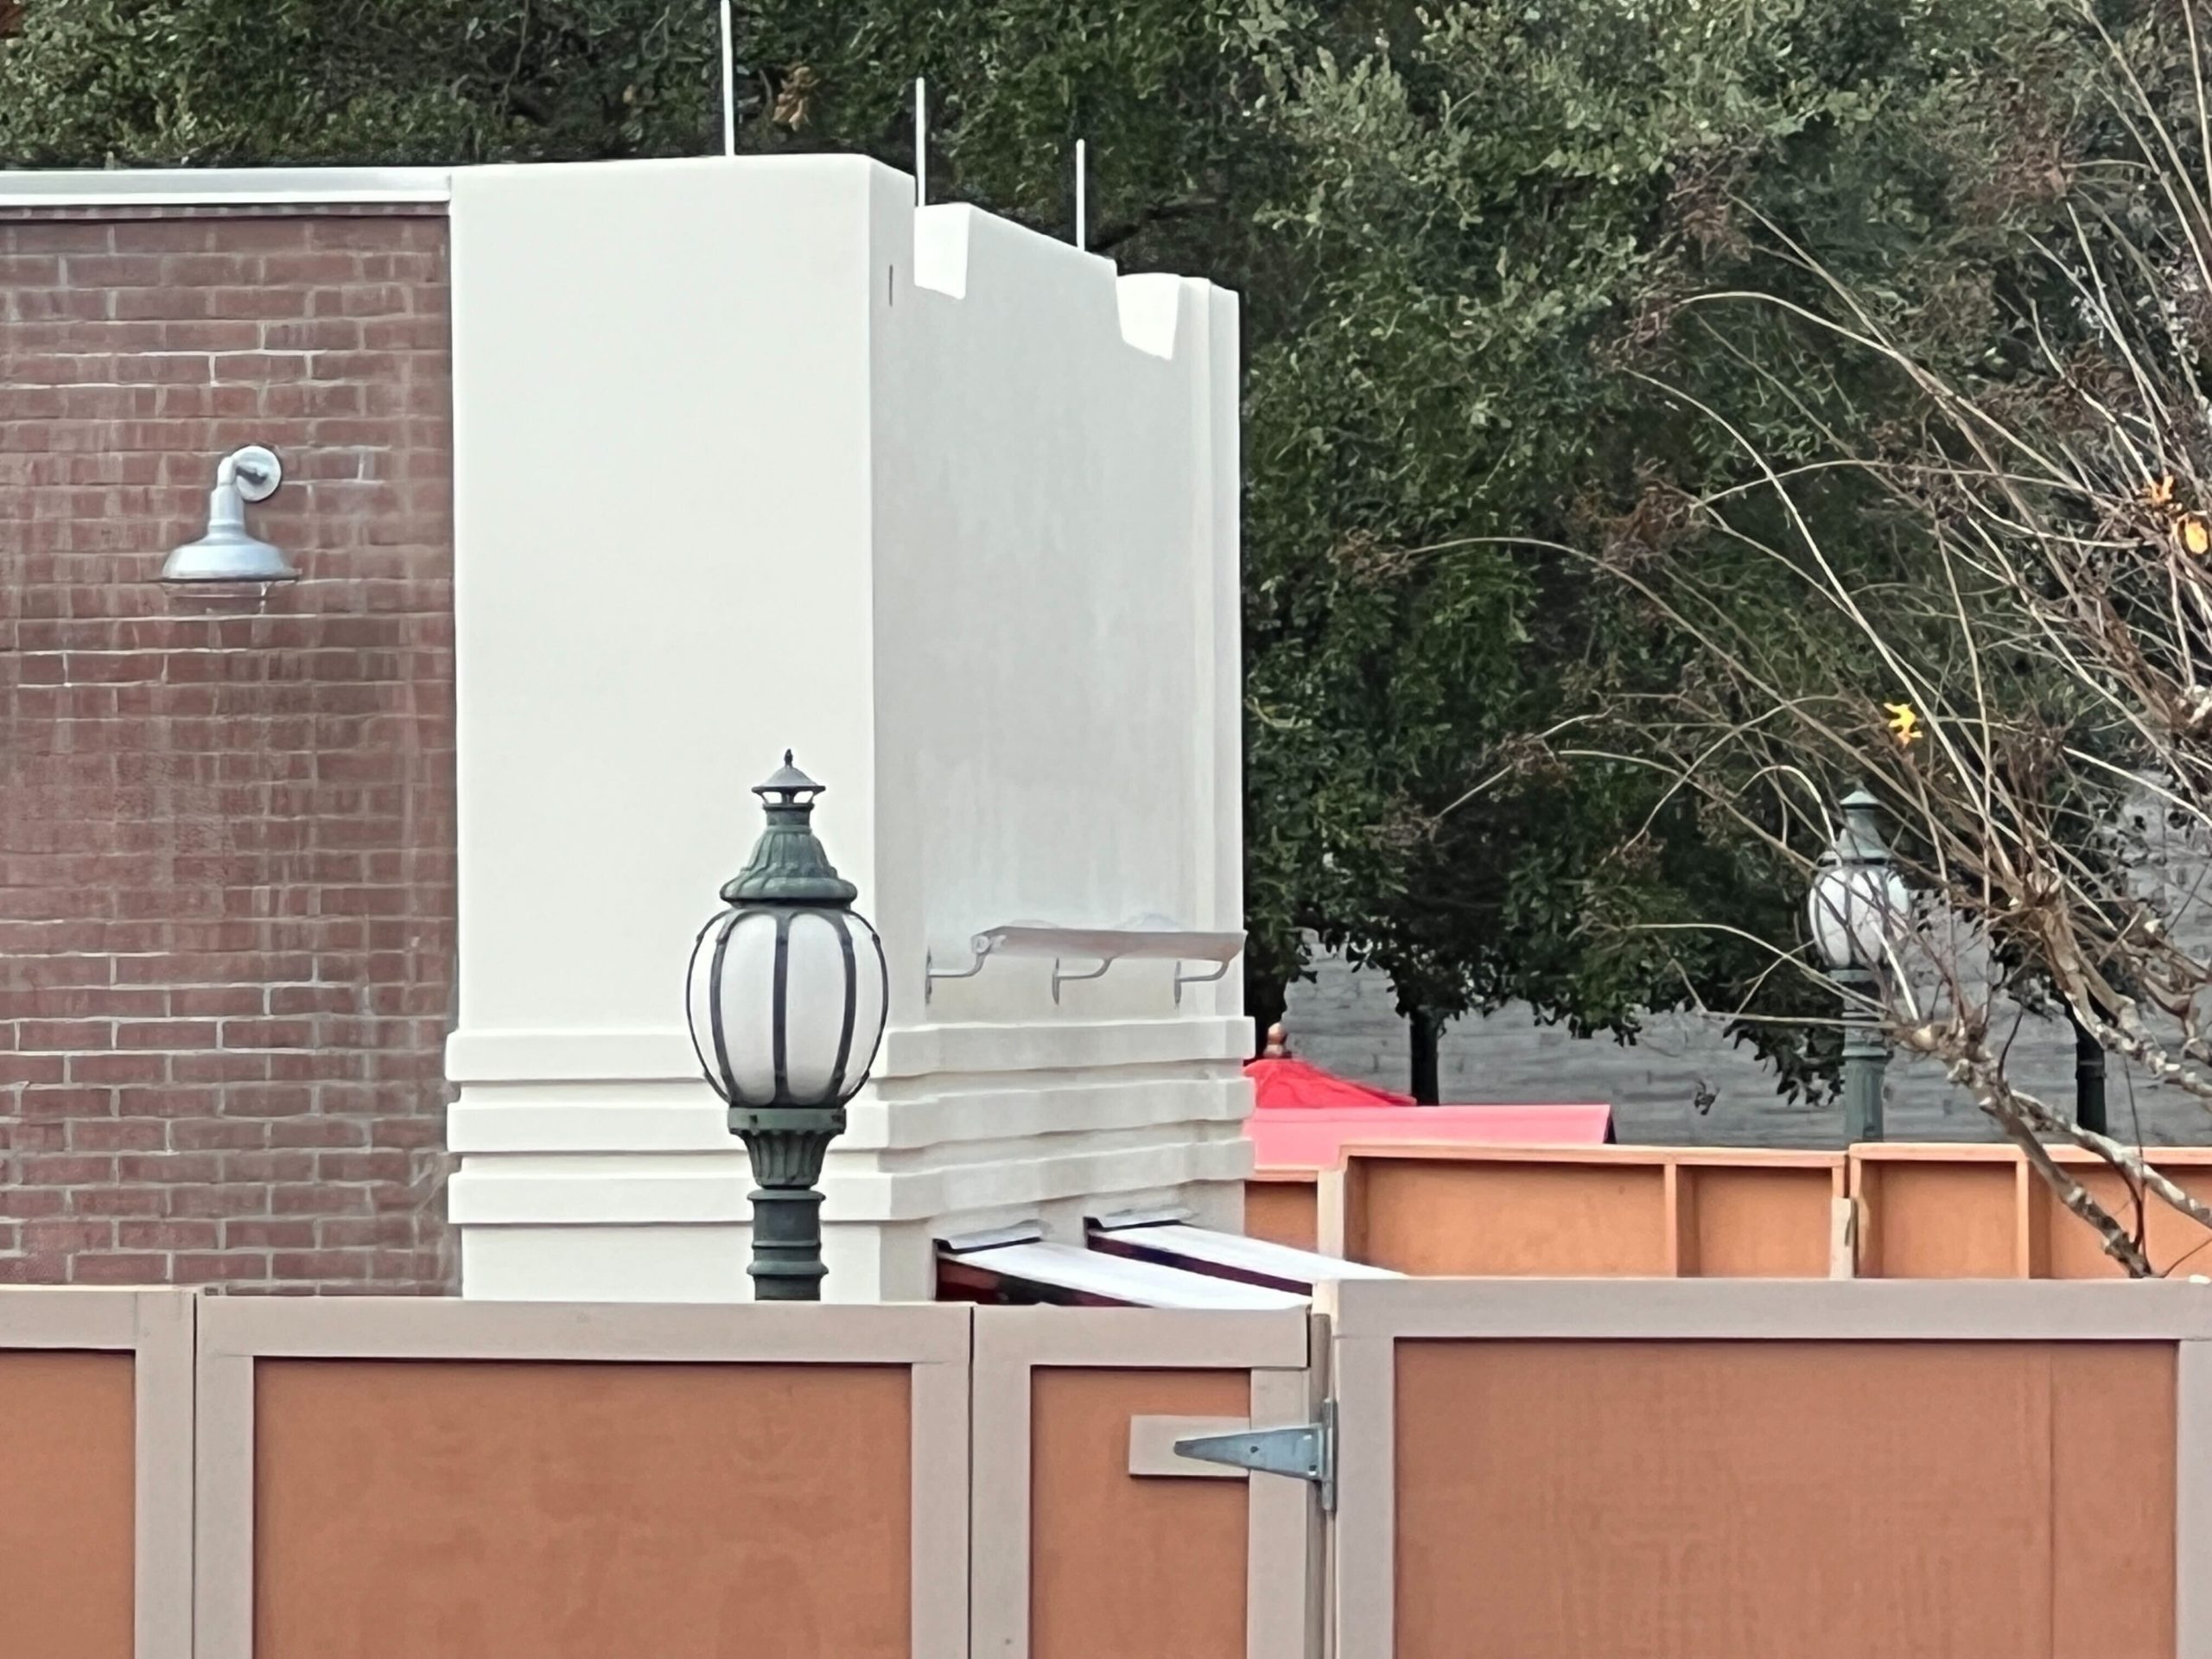 Muppet Courtyard Construction Hollywood Studios